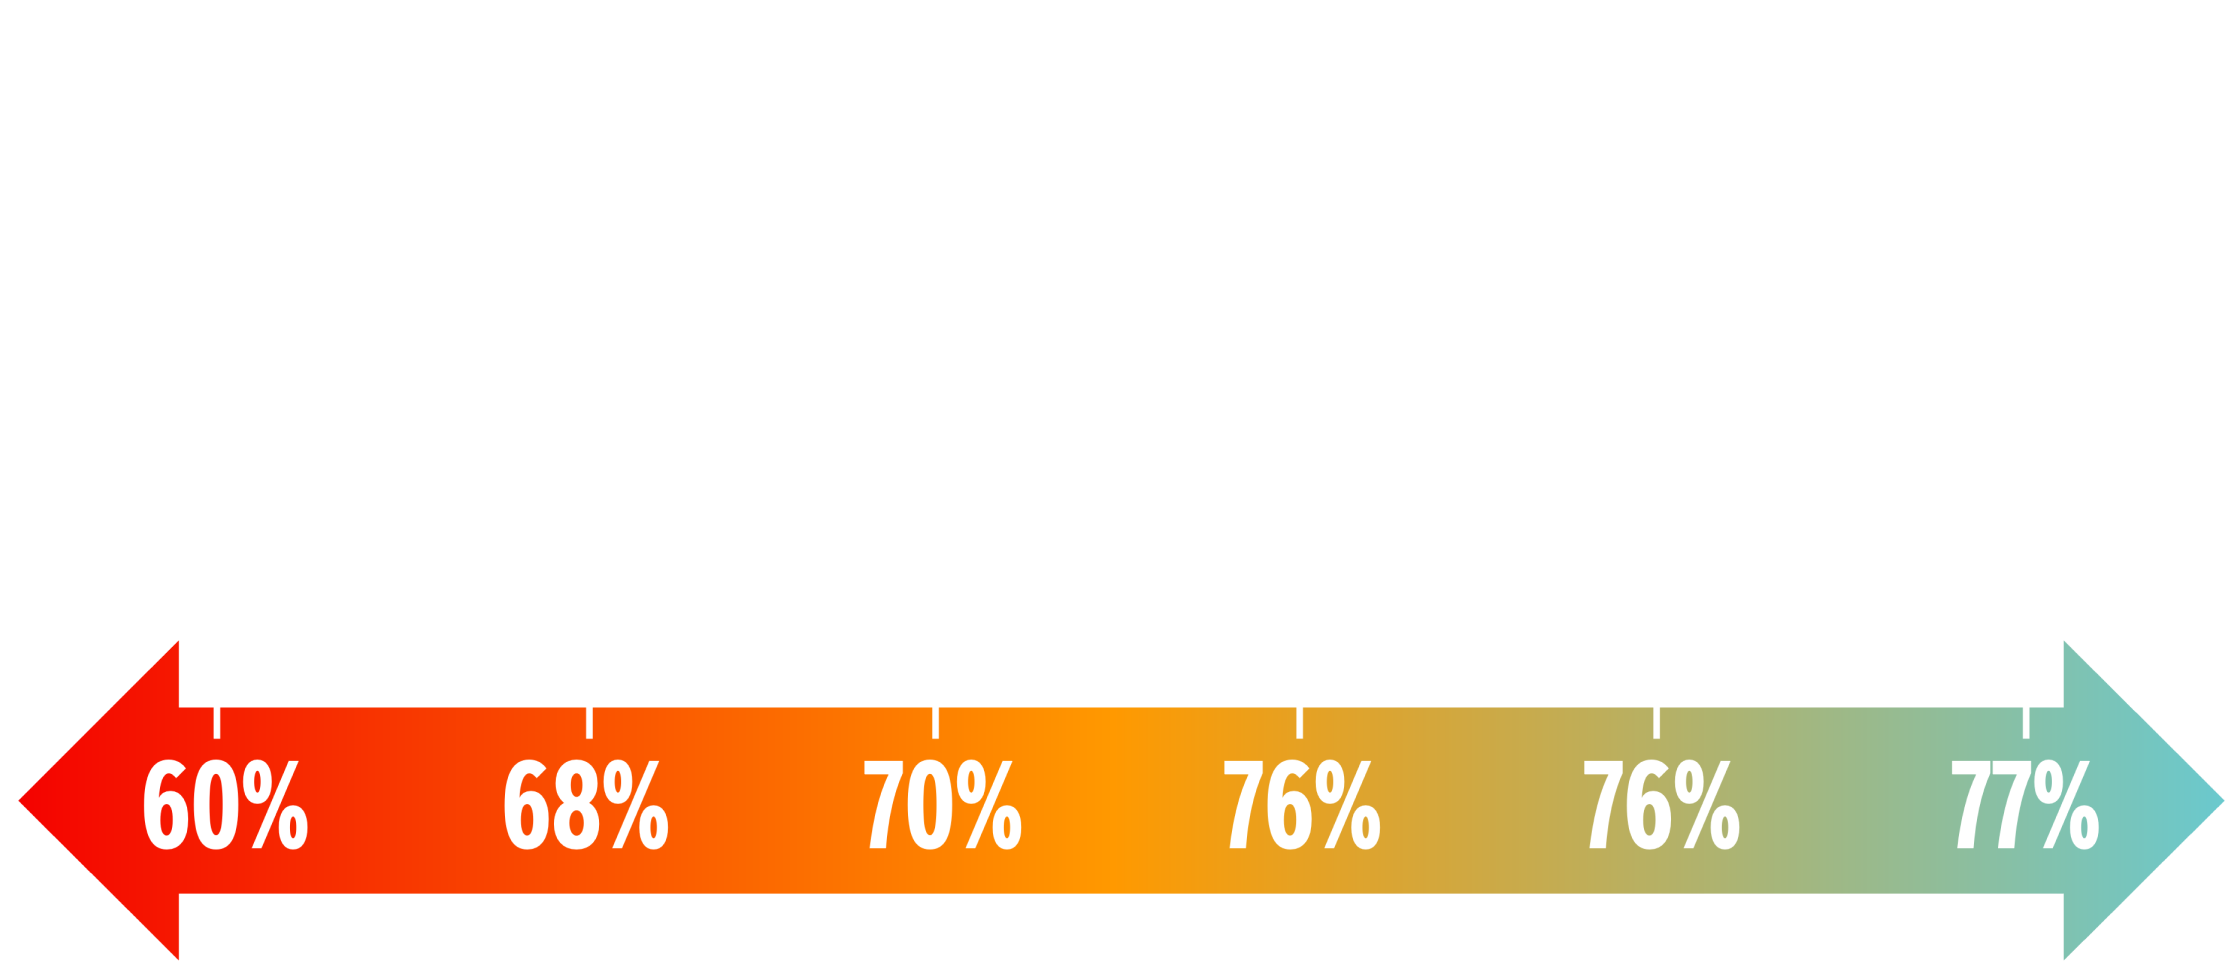 Infographic showing the components of satisfaction in 2023, as follows: Value for the price paid for food & beverage (60%), Innovative beverage choices (68%), Food & beverage wait time (70%), Quality of food & beverage (76%), Variety of beverage options (76%), and Friendliness of the staff (77%).